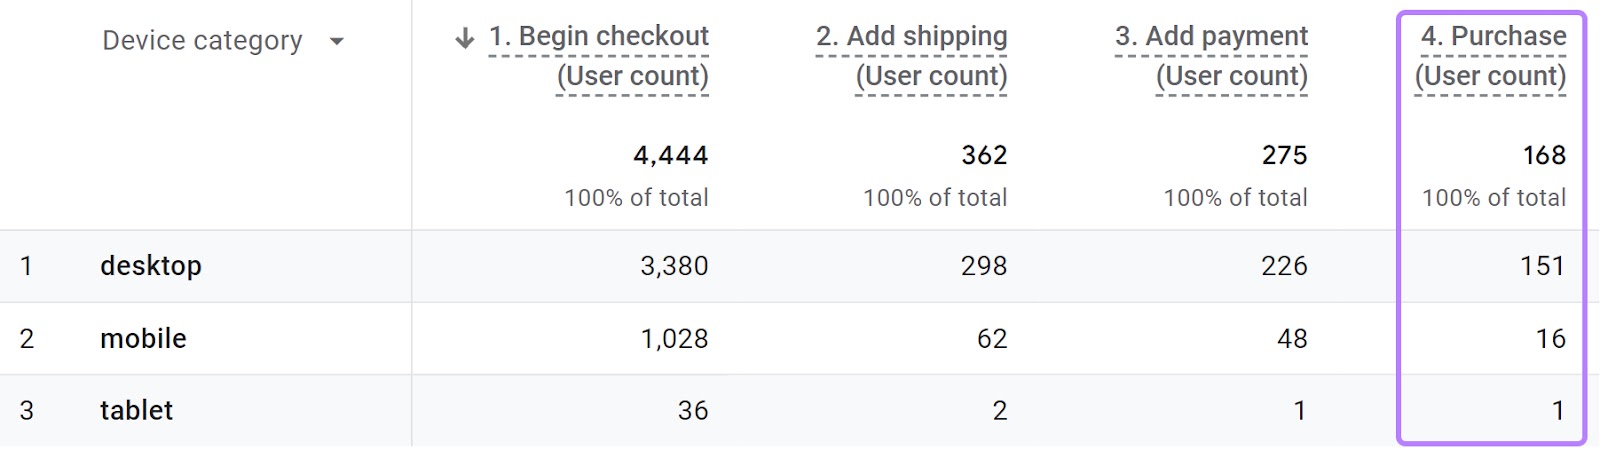 "4. Purchase (User count)" column highlighted in the table